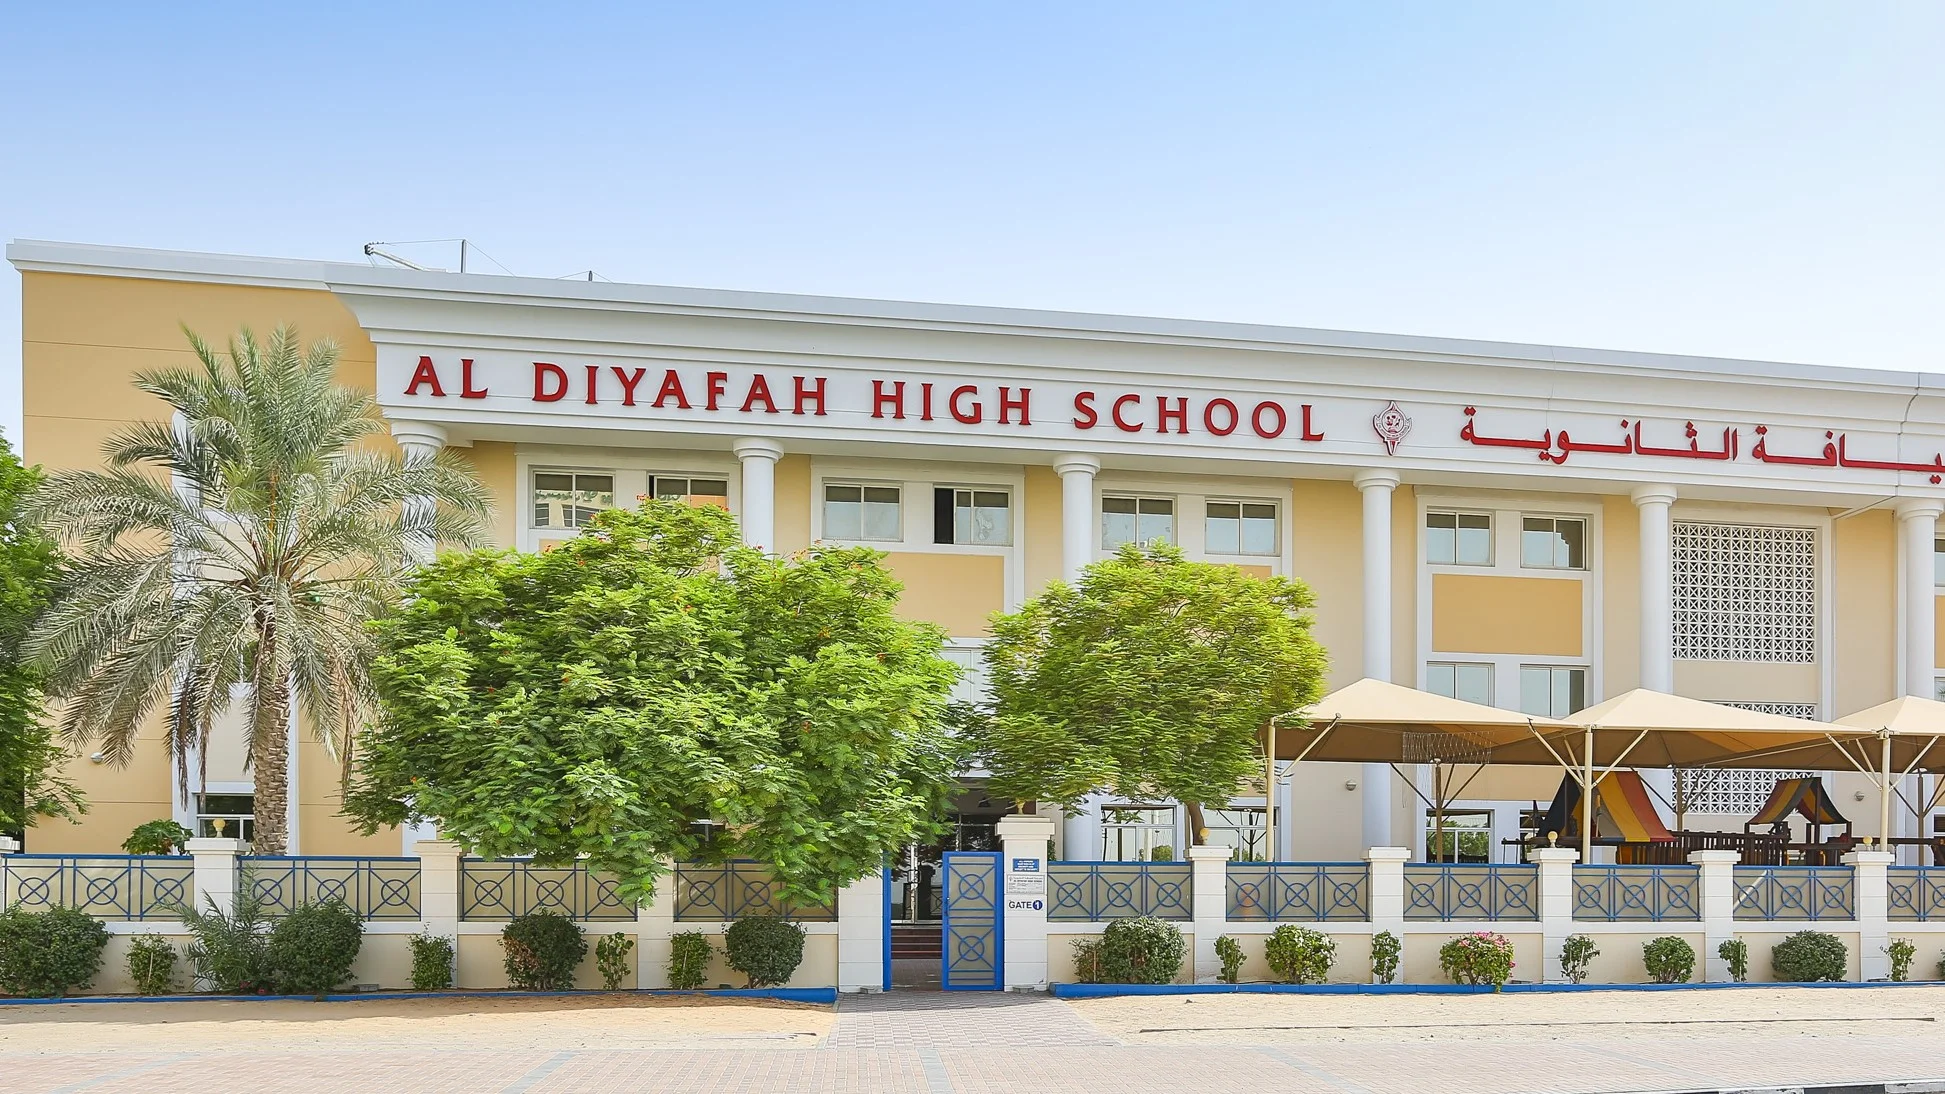 Al Diyafah High School LLC, established in September 1982, has evolved significantly, relocating to a new campus in 2001 to accommodate the growing student population, now boasting over 1,700 students from diverse backgrounds.